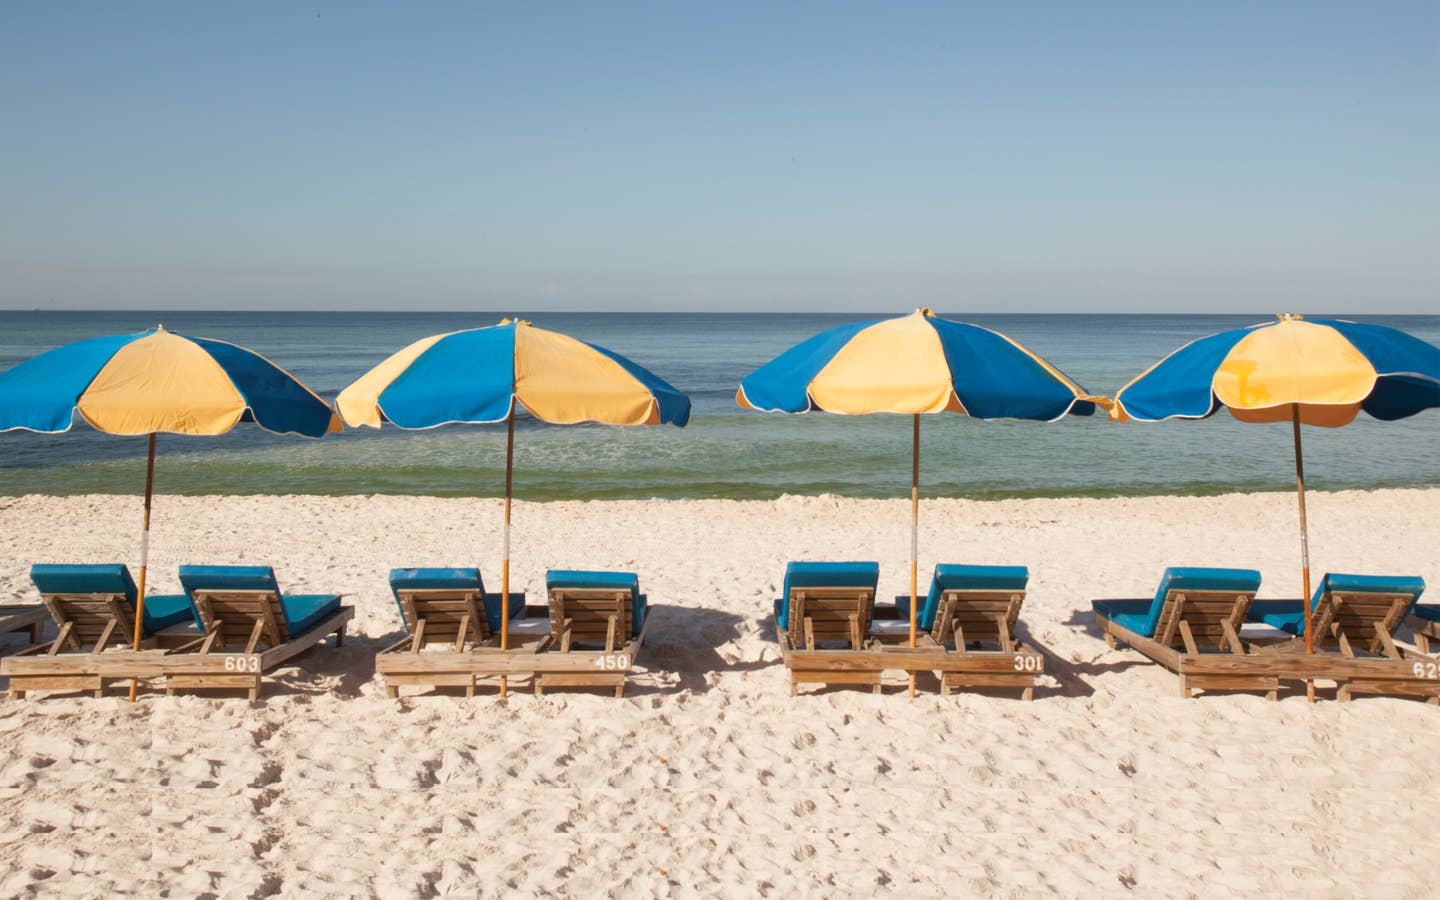 View of four beach chairs under two umbrellas at Panama City Beach in Florida.